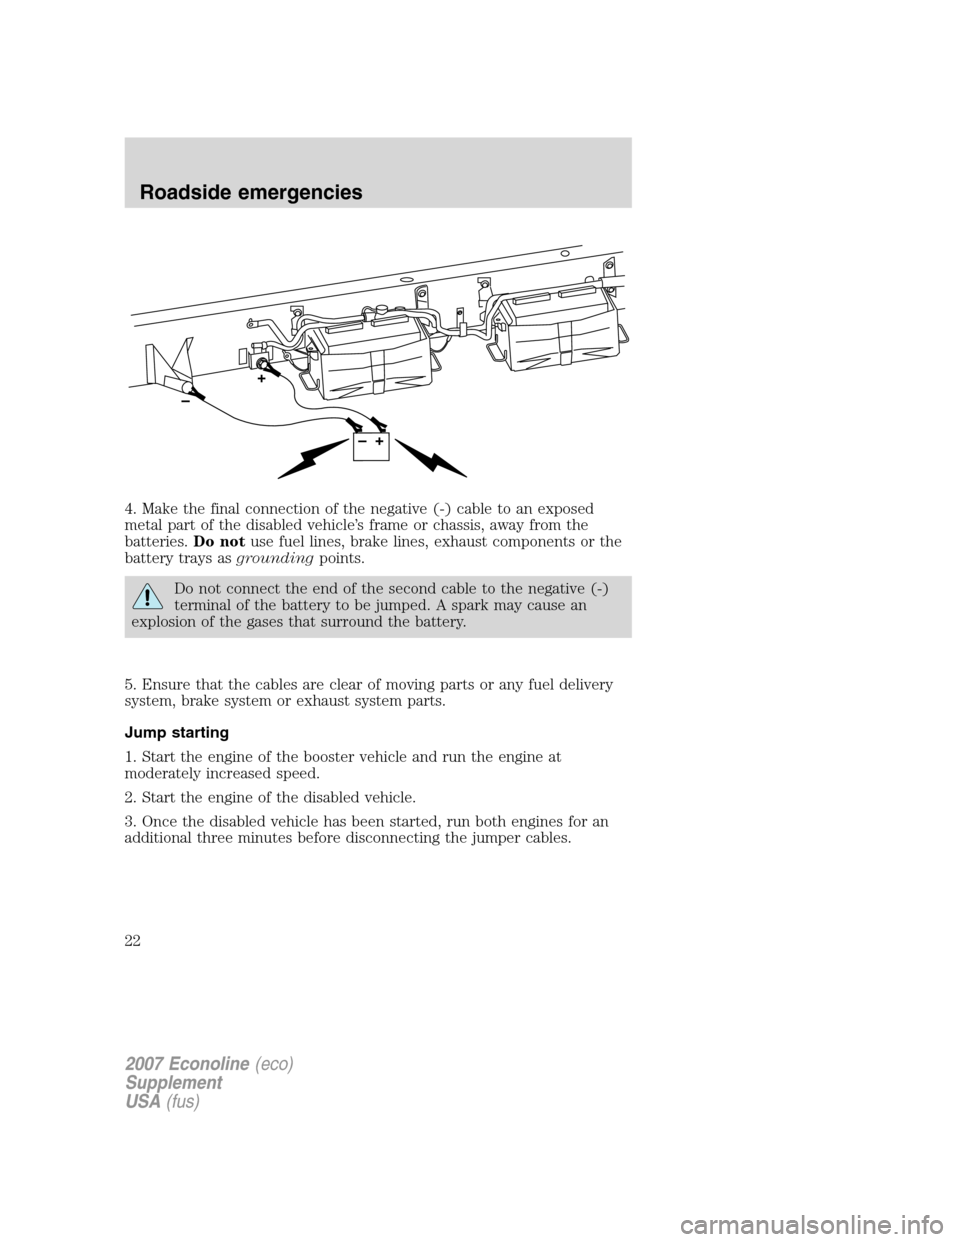 FORD SUPER DUTY 2007 1.G Diesel Supplement Manual 4. Make the final connection of the negative (-) cable to an exposed
metal part of the disabled vehicle’s frame or chassis, away from the
batteries.Do notuse fuel lines, brake lines, exhaust compone